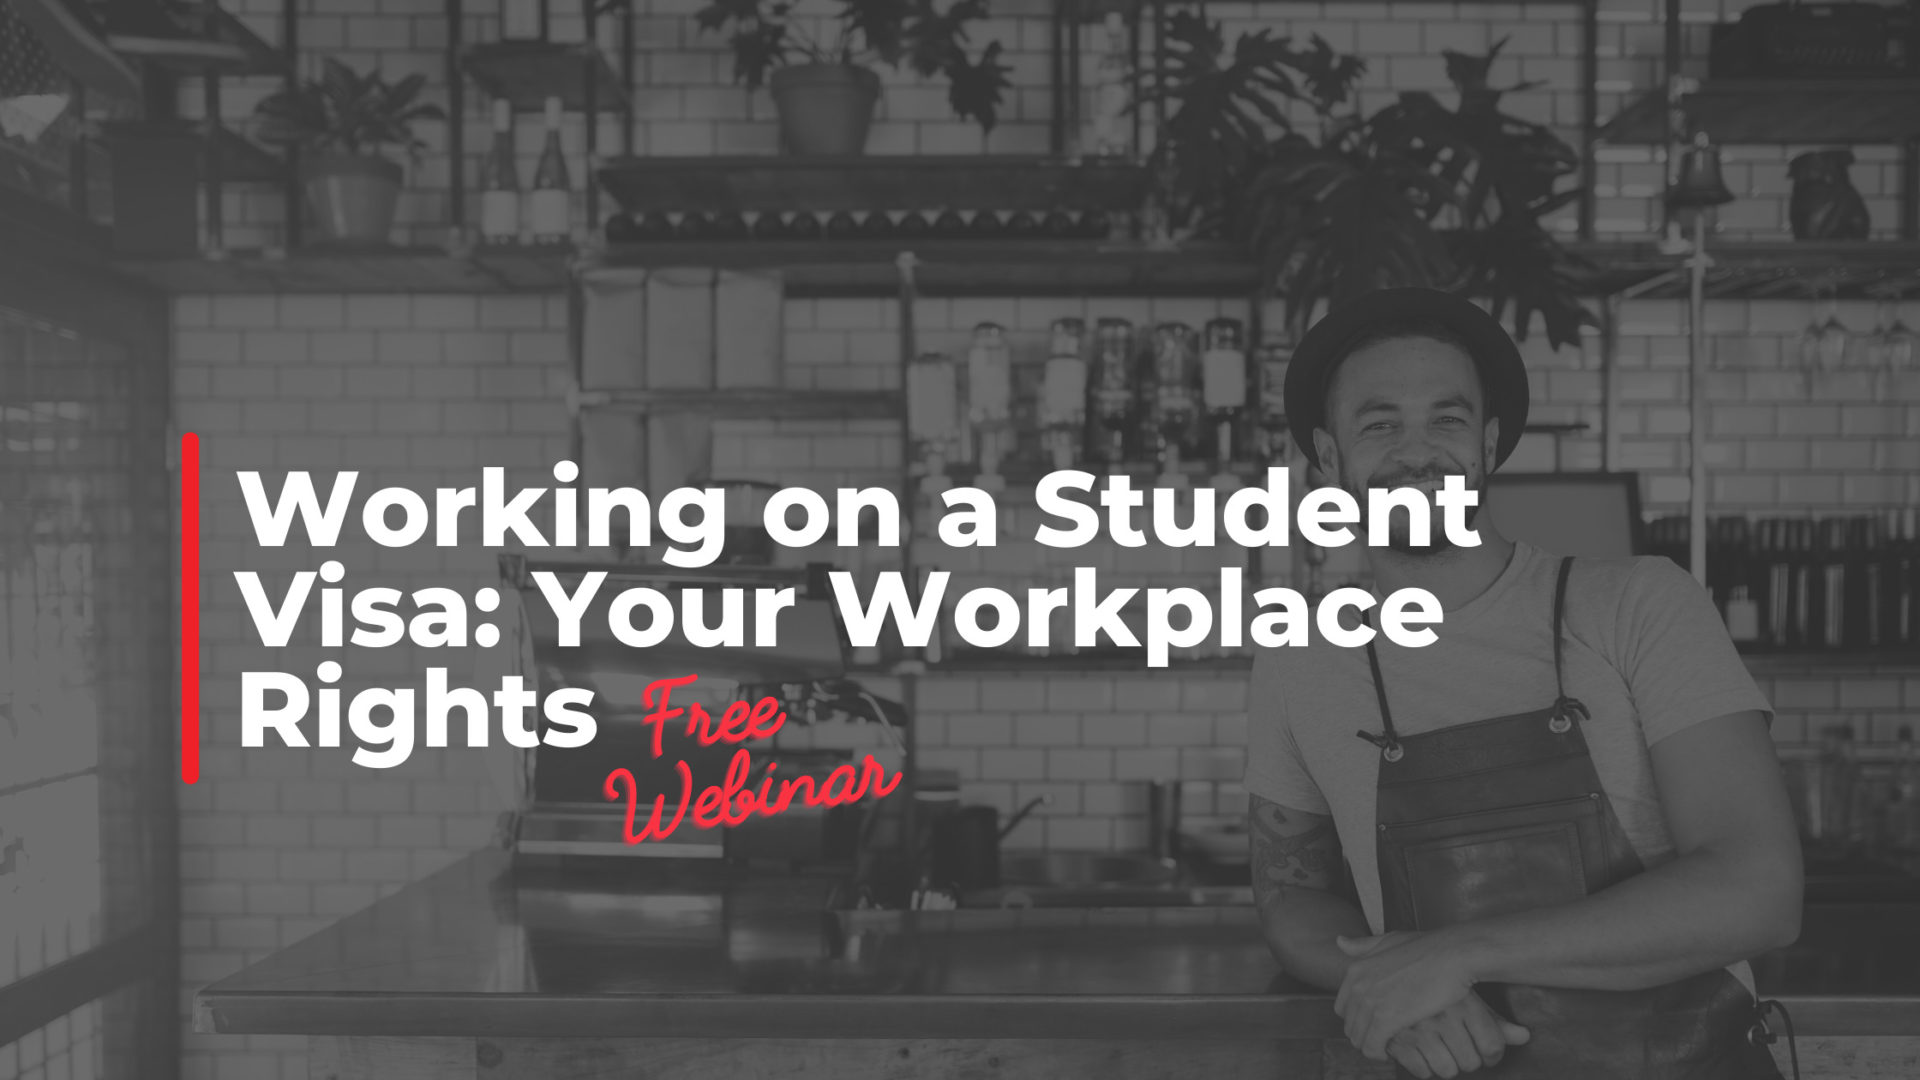 Working on a Student Visa: Your Workplace Rights (Free Webinar)